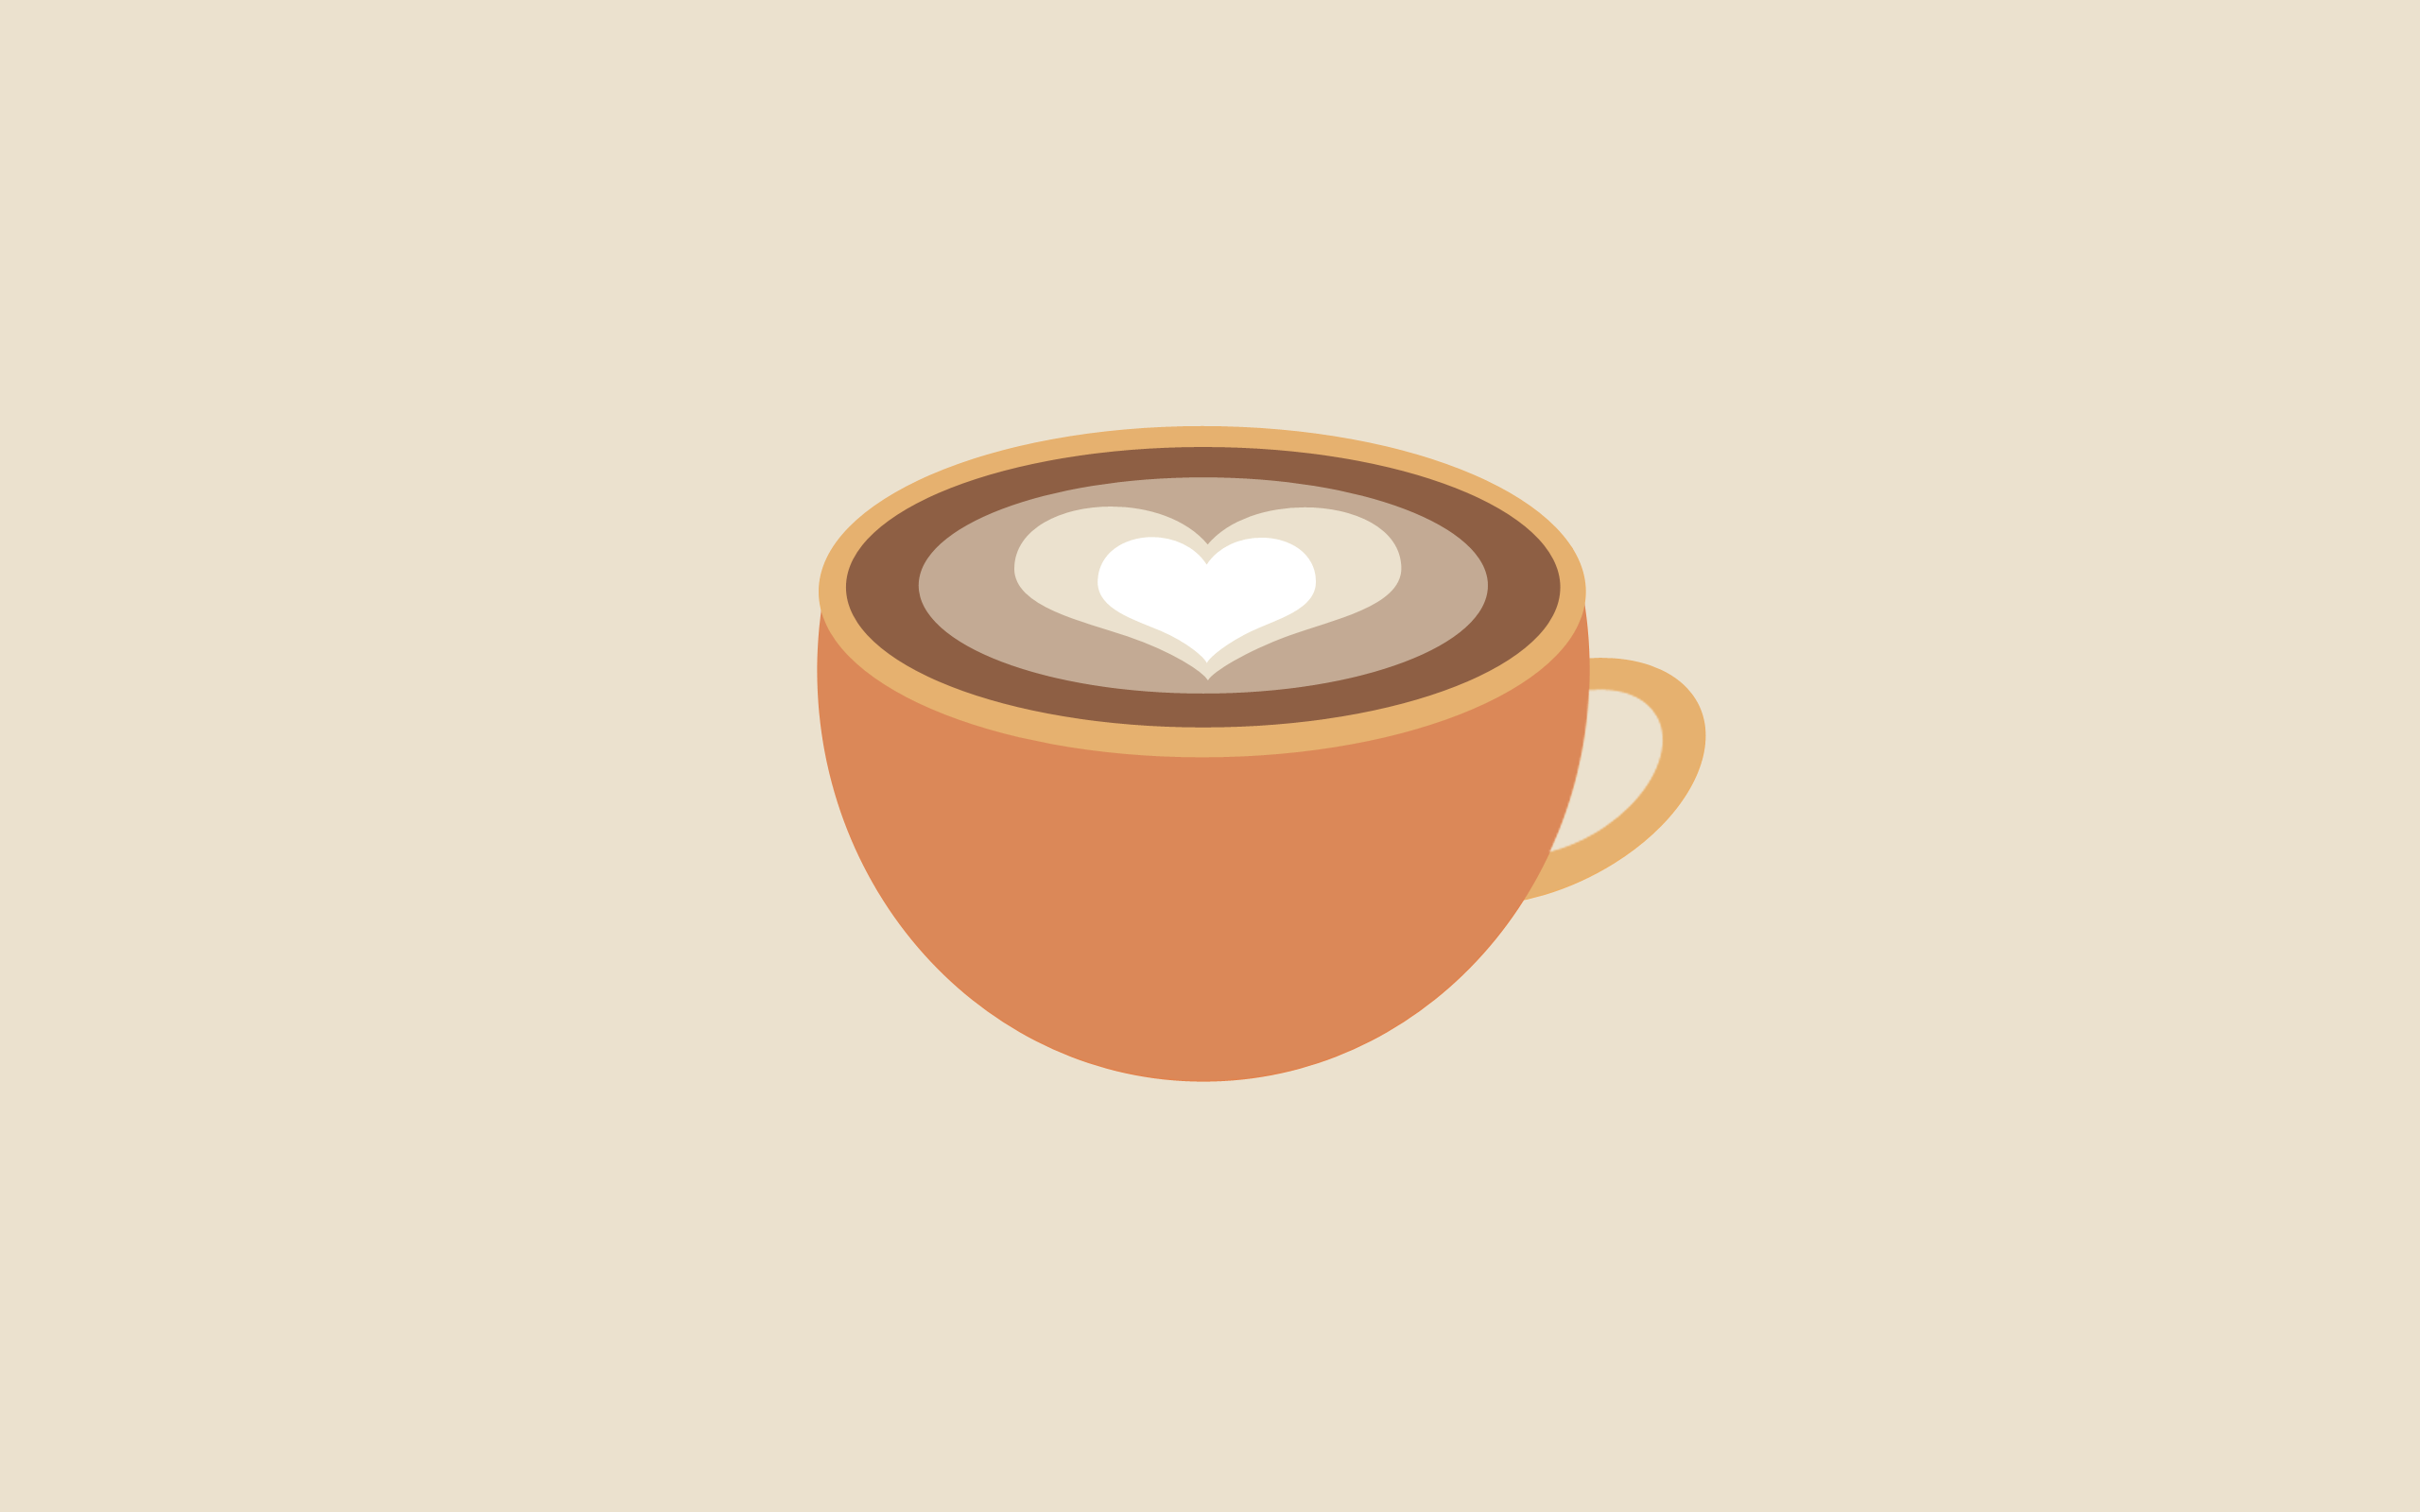 A cup of coffee with heart on top - Coffee